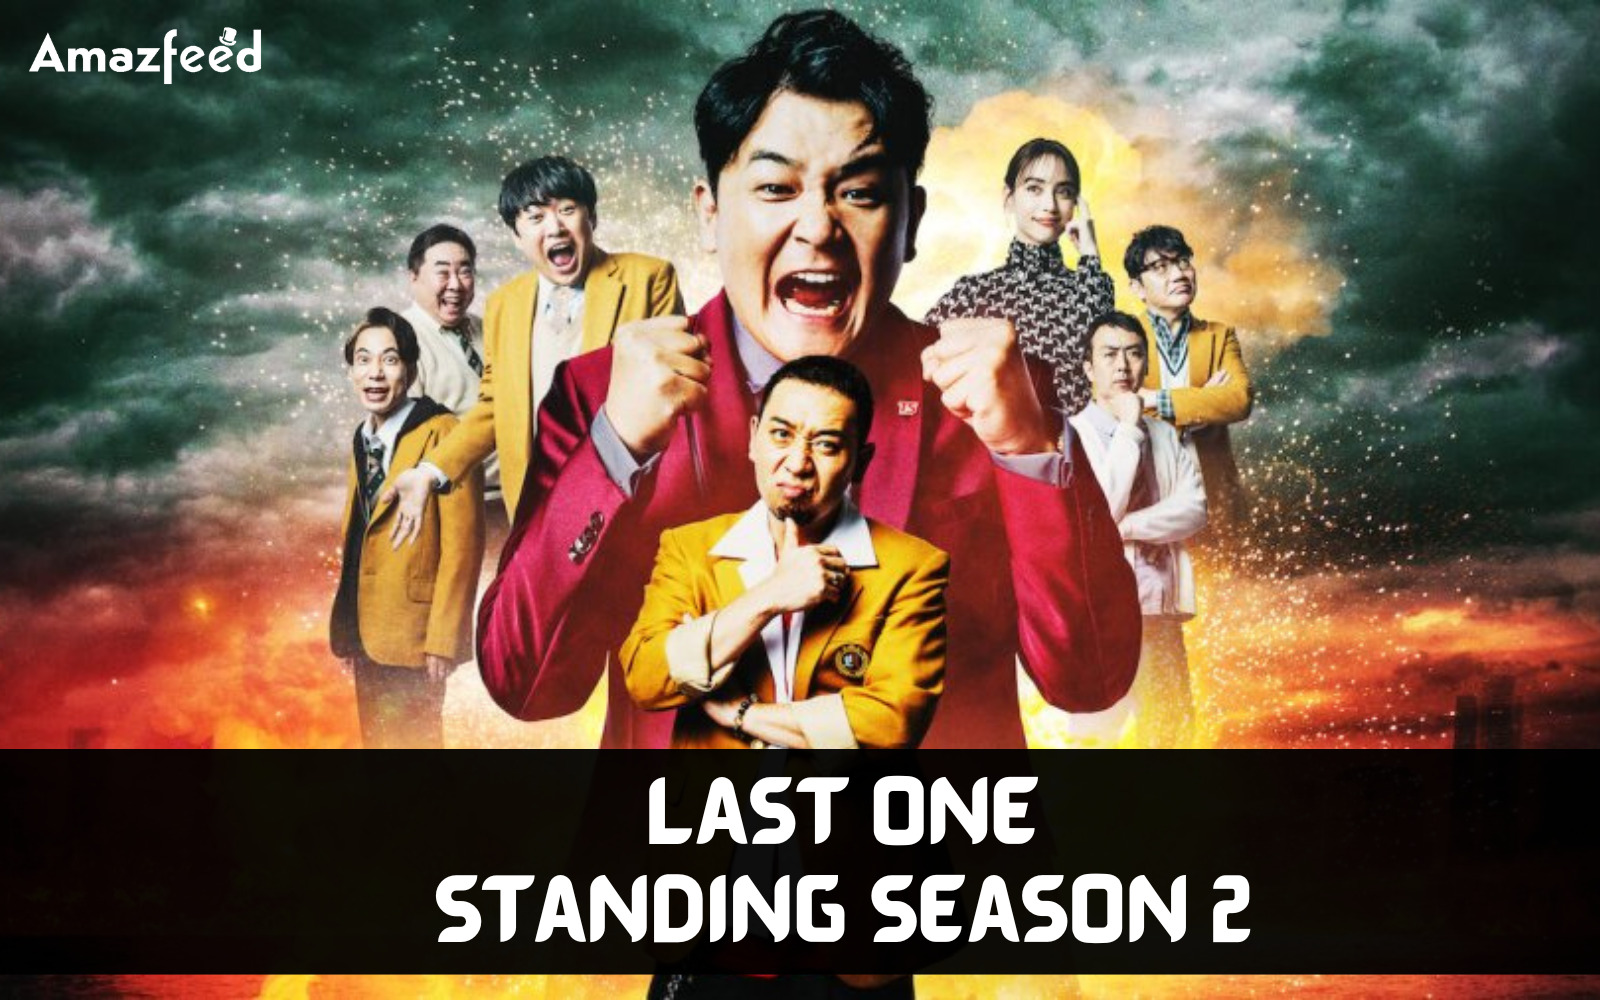 Is There Any News Last One Standing Season 2 Trailer